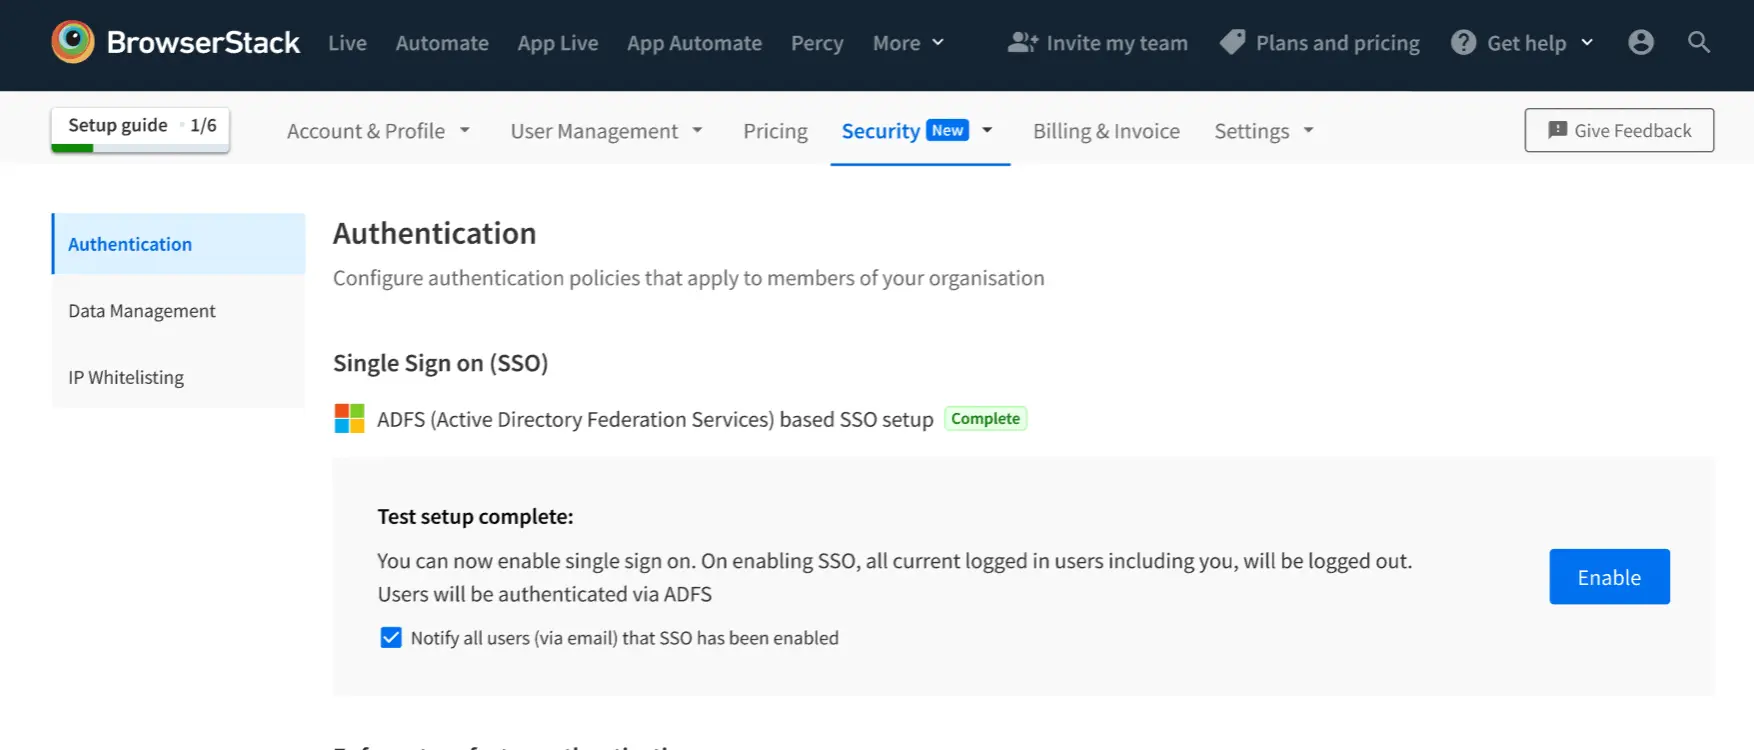 Enable single sign-on for your organization